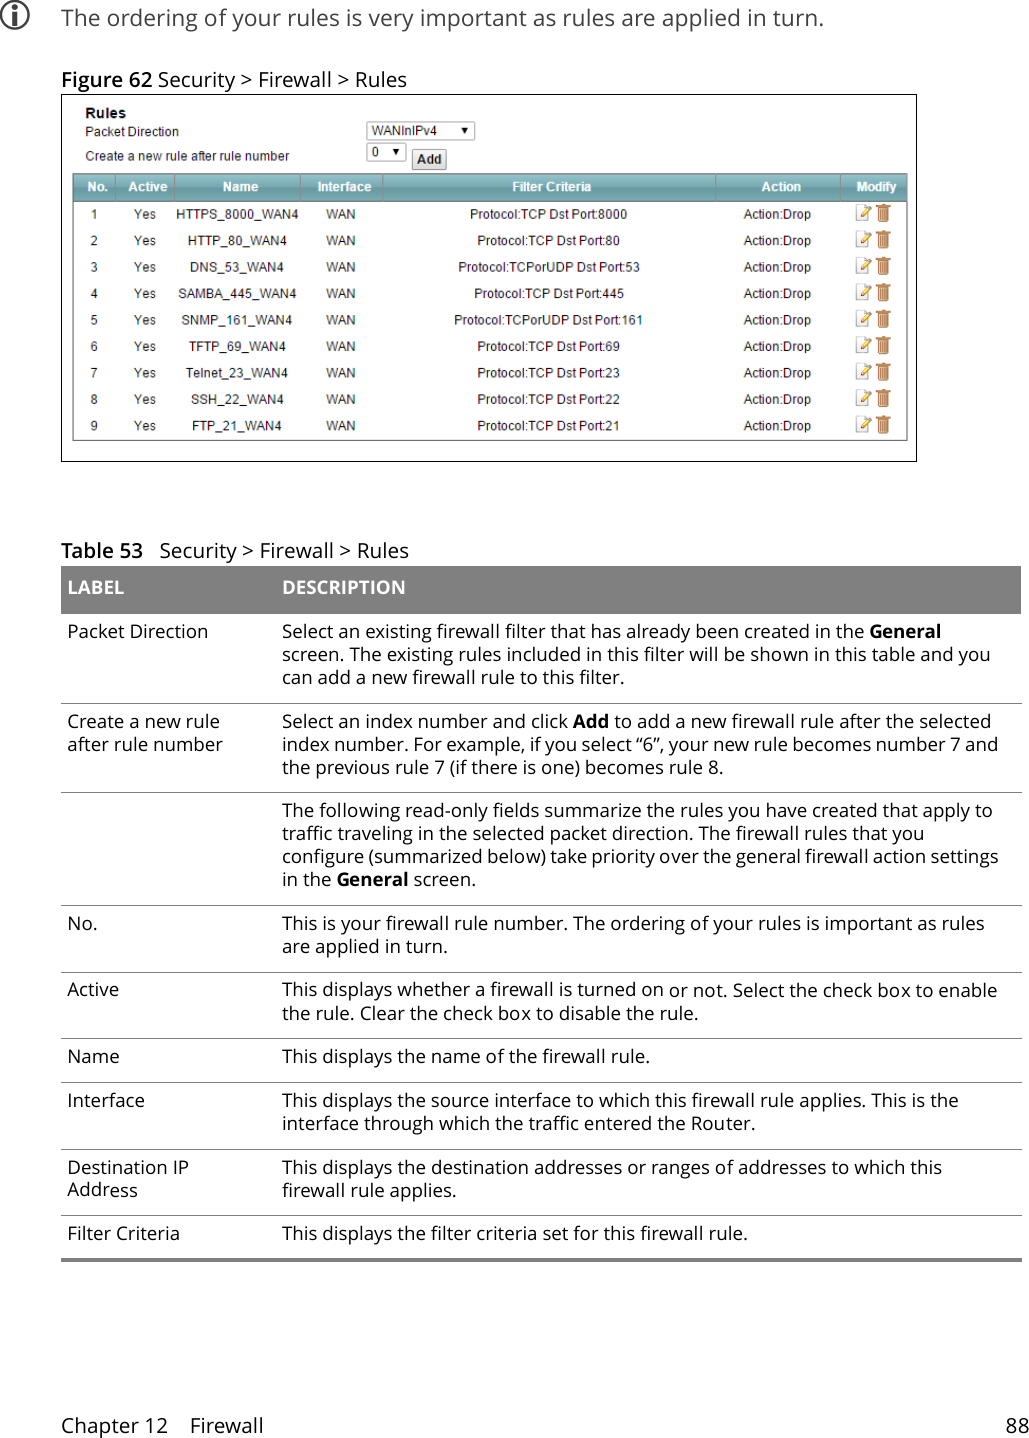 Chapter 12    Firewall 88 The ordering of your rules is very important as rules are applied in turn.Figure 62 Security &gt; Firewall &gt; Rules  Table 53   Security &gt; Firewall &gt; Rules LABEL DESCRIPTIONPacket Direction Select an existing firewall filter that has already been created in the General screen. The existing rules included in this filter will be shown in this table and you can add a new firewall rule to this filter.Create a new rule after rule number Select an index number and click Add to add a new firewall rule after the selected index number. For example, if you select “6”, your new rule becomes number 7 and the previous rule 7 (if there is one) becomes rule 8.The following read-only fields summarize the rules you have created that apply to traffic traveling in the selected packet direction. The firewall rules that you configure (summarized below) take priority over the general firewall action settings in the General screen.No. This is your firewall rule number. The ordering of your rules is important as rules are applied in turn. Active This displays whether a firewall is turned on or not. Select the check box to enable the rule. Clear the check box to disable the rule.Name This displays the name of the firewall rule.Interface This displays the source interface to which this firewall rule applies. This is the interface through which the traffic entered the Router. Destination IP AddressThis displays the destination addresses or ranges of addresses to which this firewall rule applies. Filter Criteria This displays the filter criteria set for this firewall rule. 